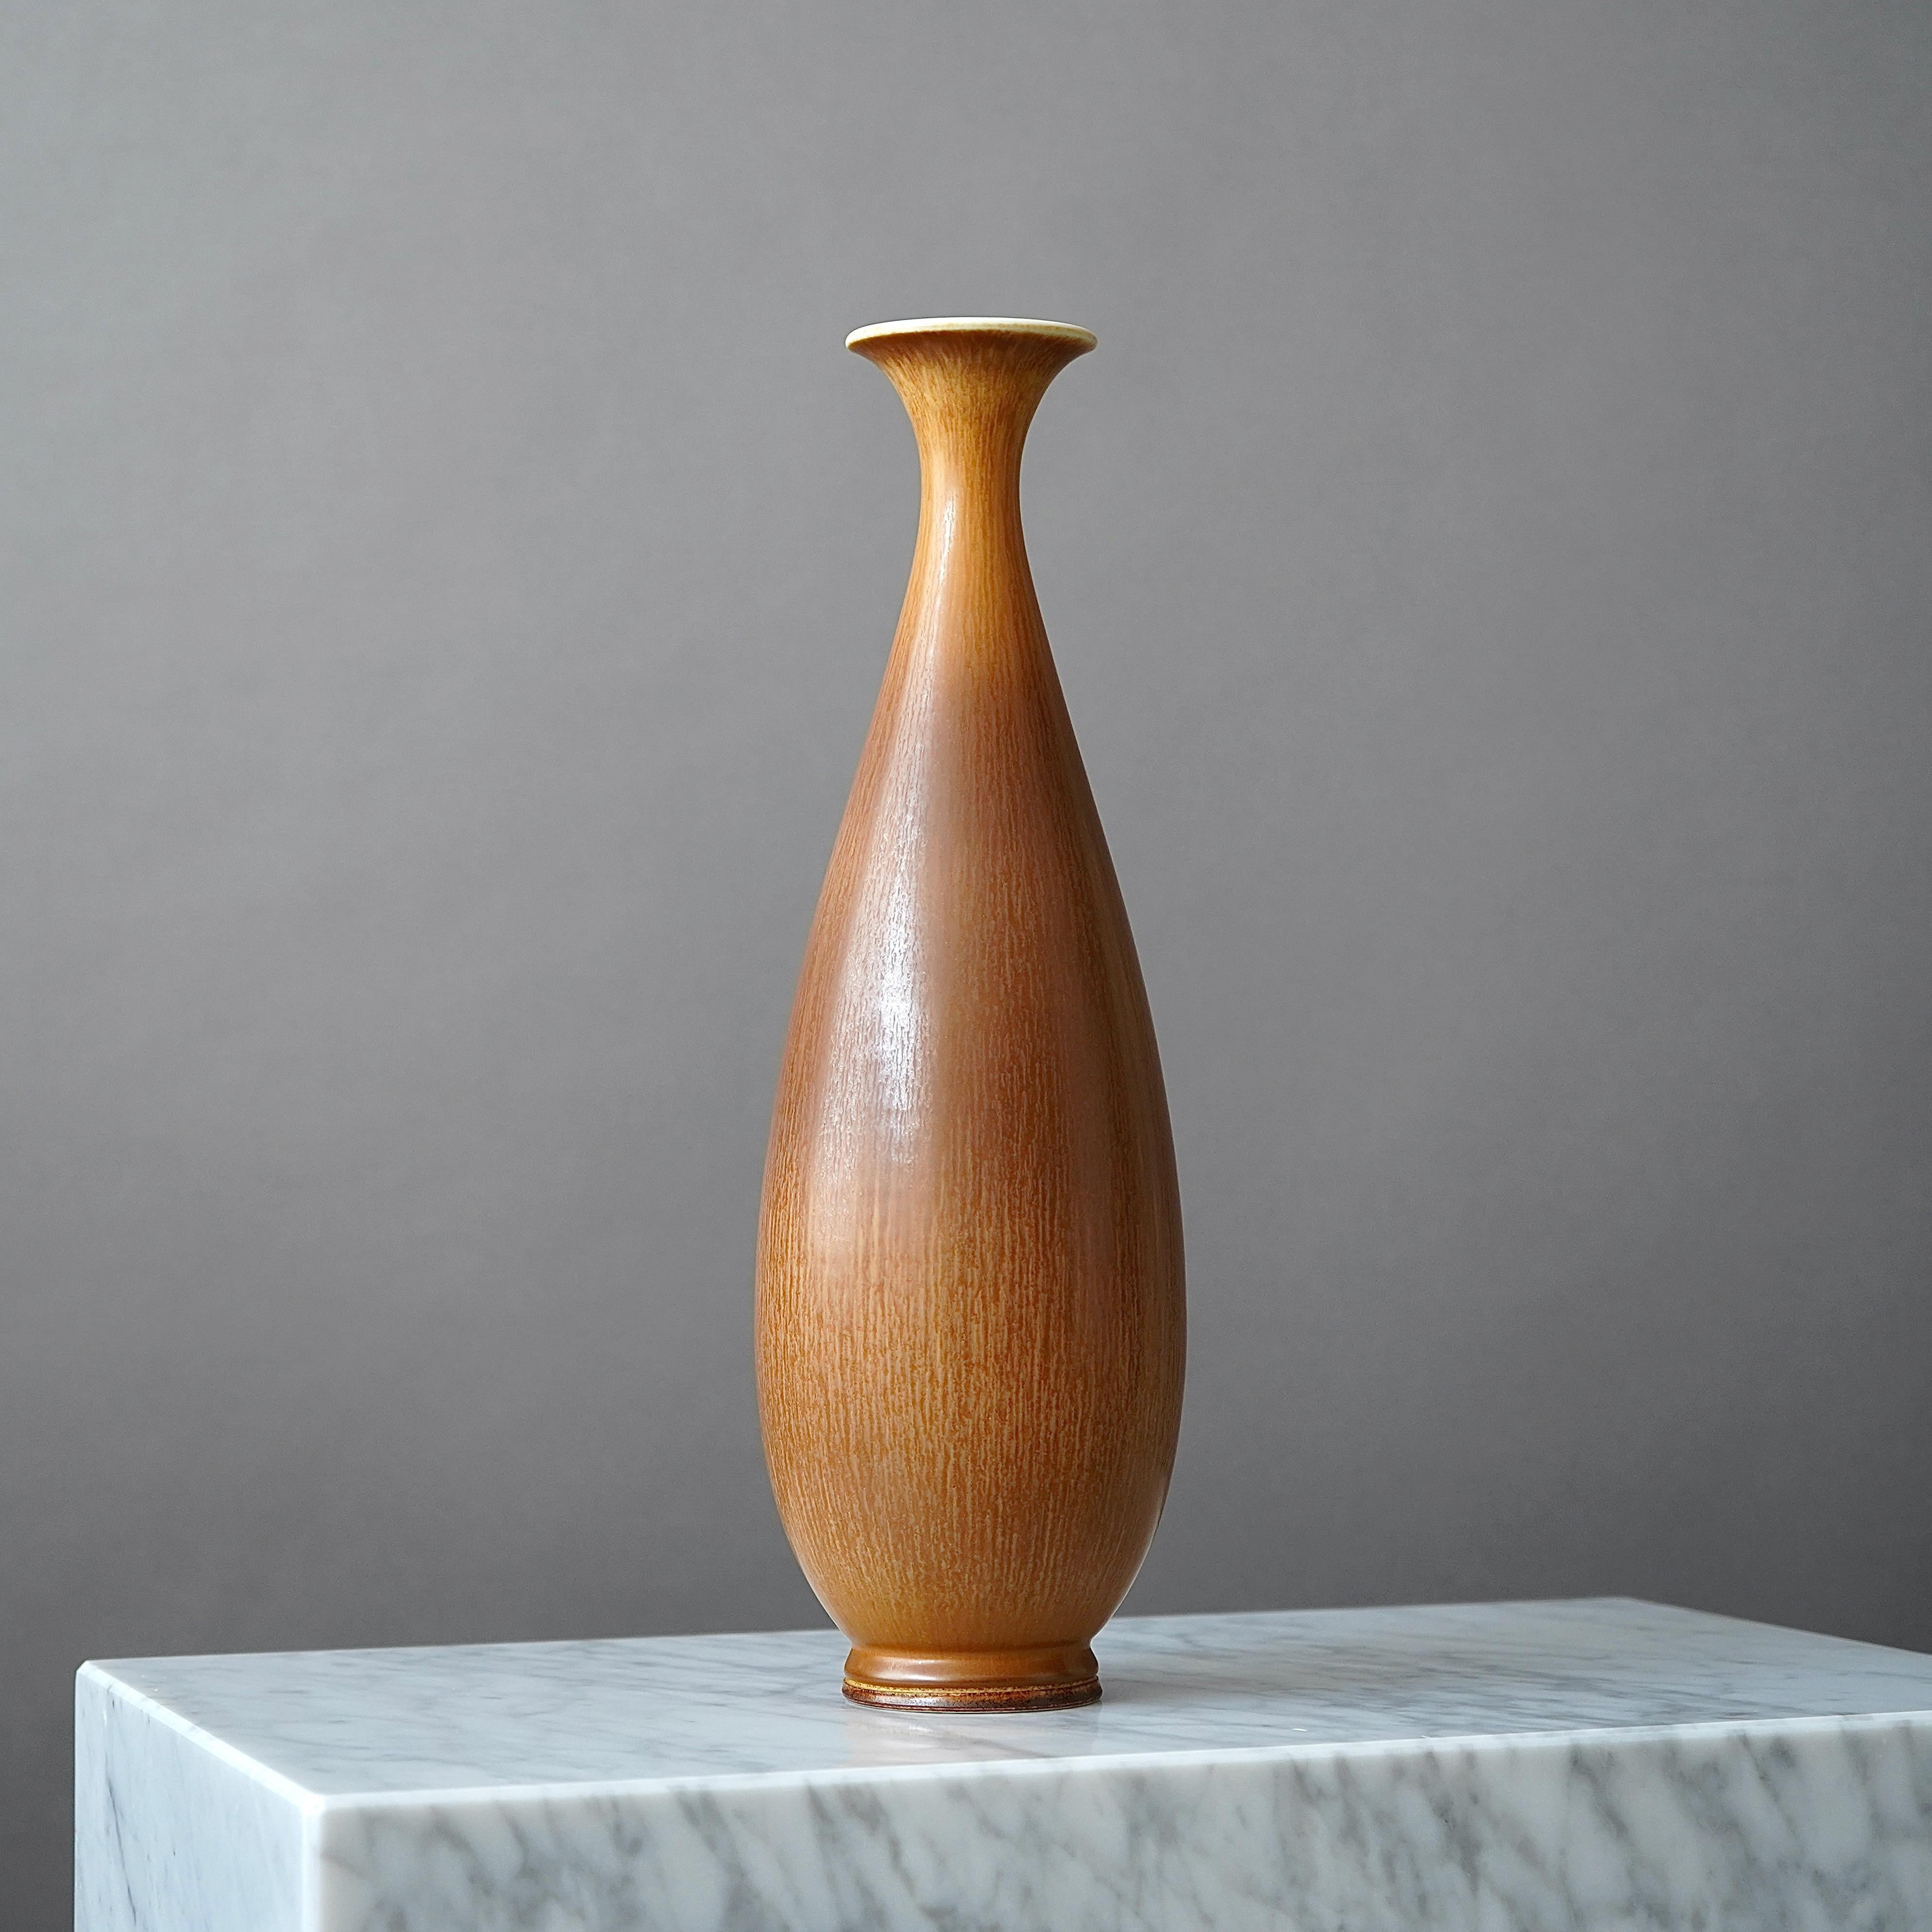 A large and beautiful stoneware vase with amazing hare’s fur glaze.
Made by master thrower Berndt Friberg, in the artist's studio at Gustavsberg, Sweden, 1964.

Excellent condition. 
Incised signature 